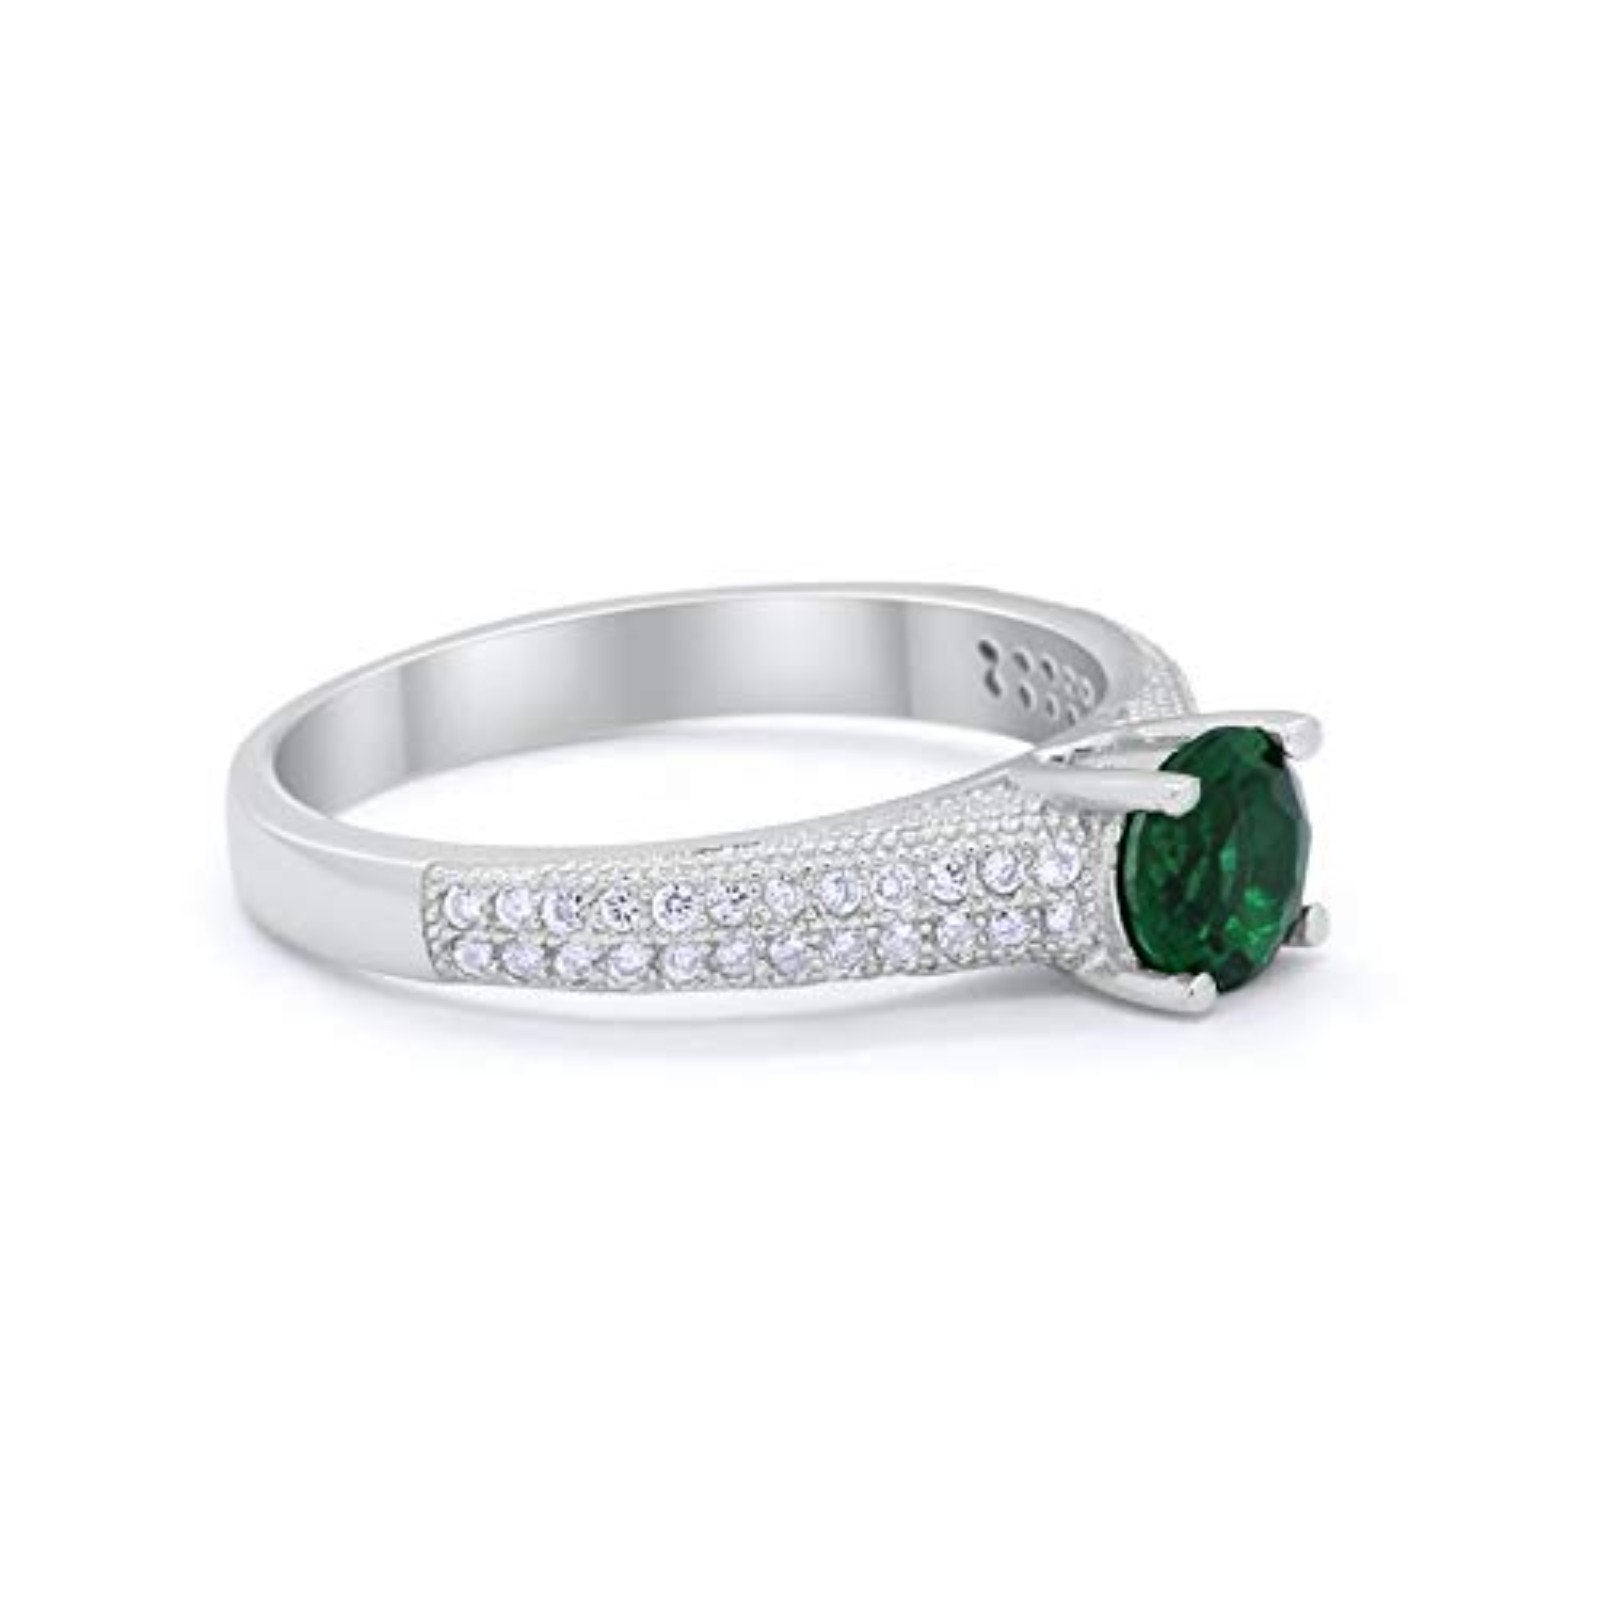 Vintage Style Engagement Ring Round Simulated Green Emerald Cubic Zirconia 925 Sterling Silver